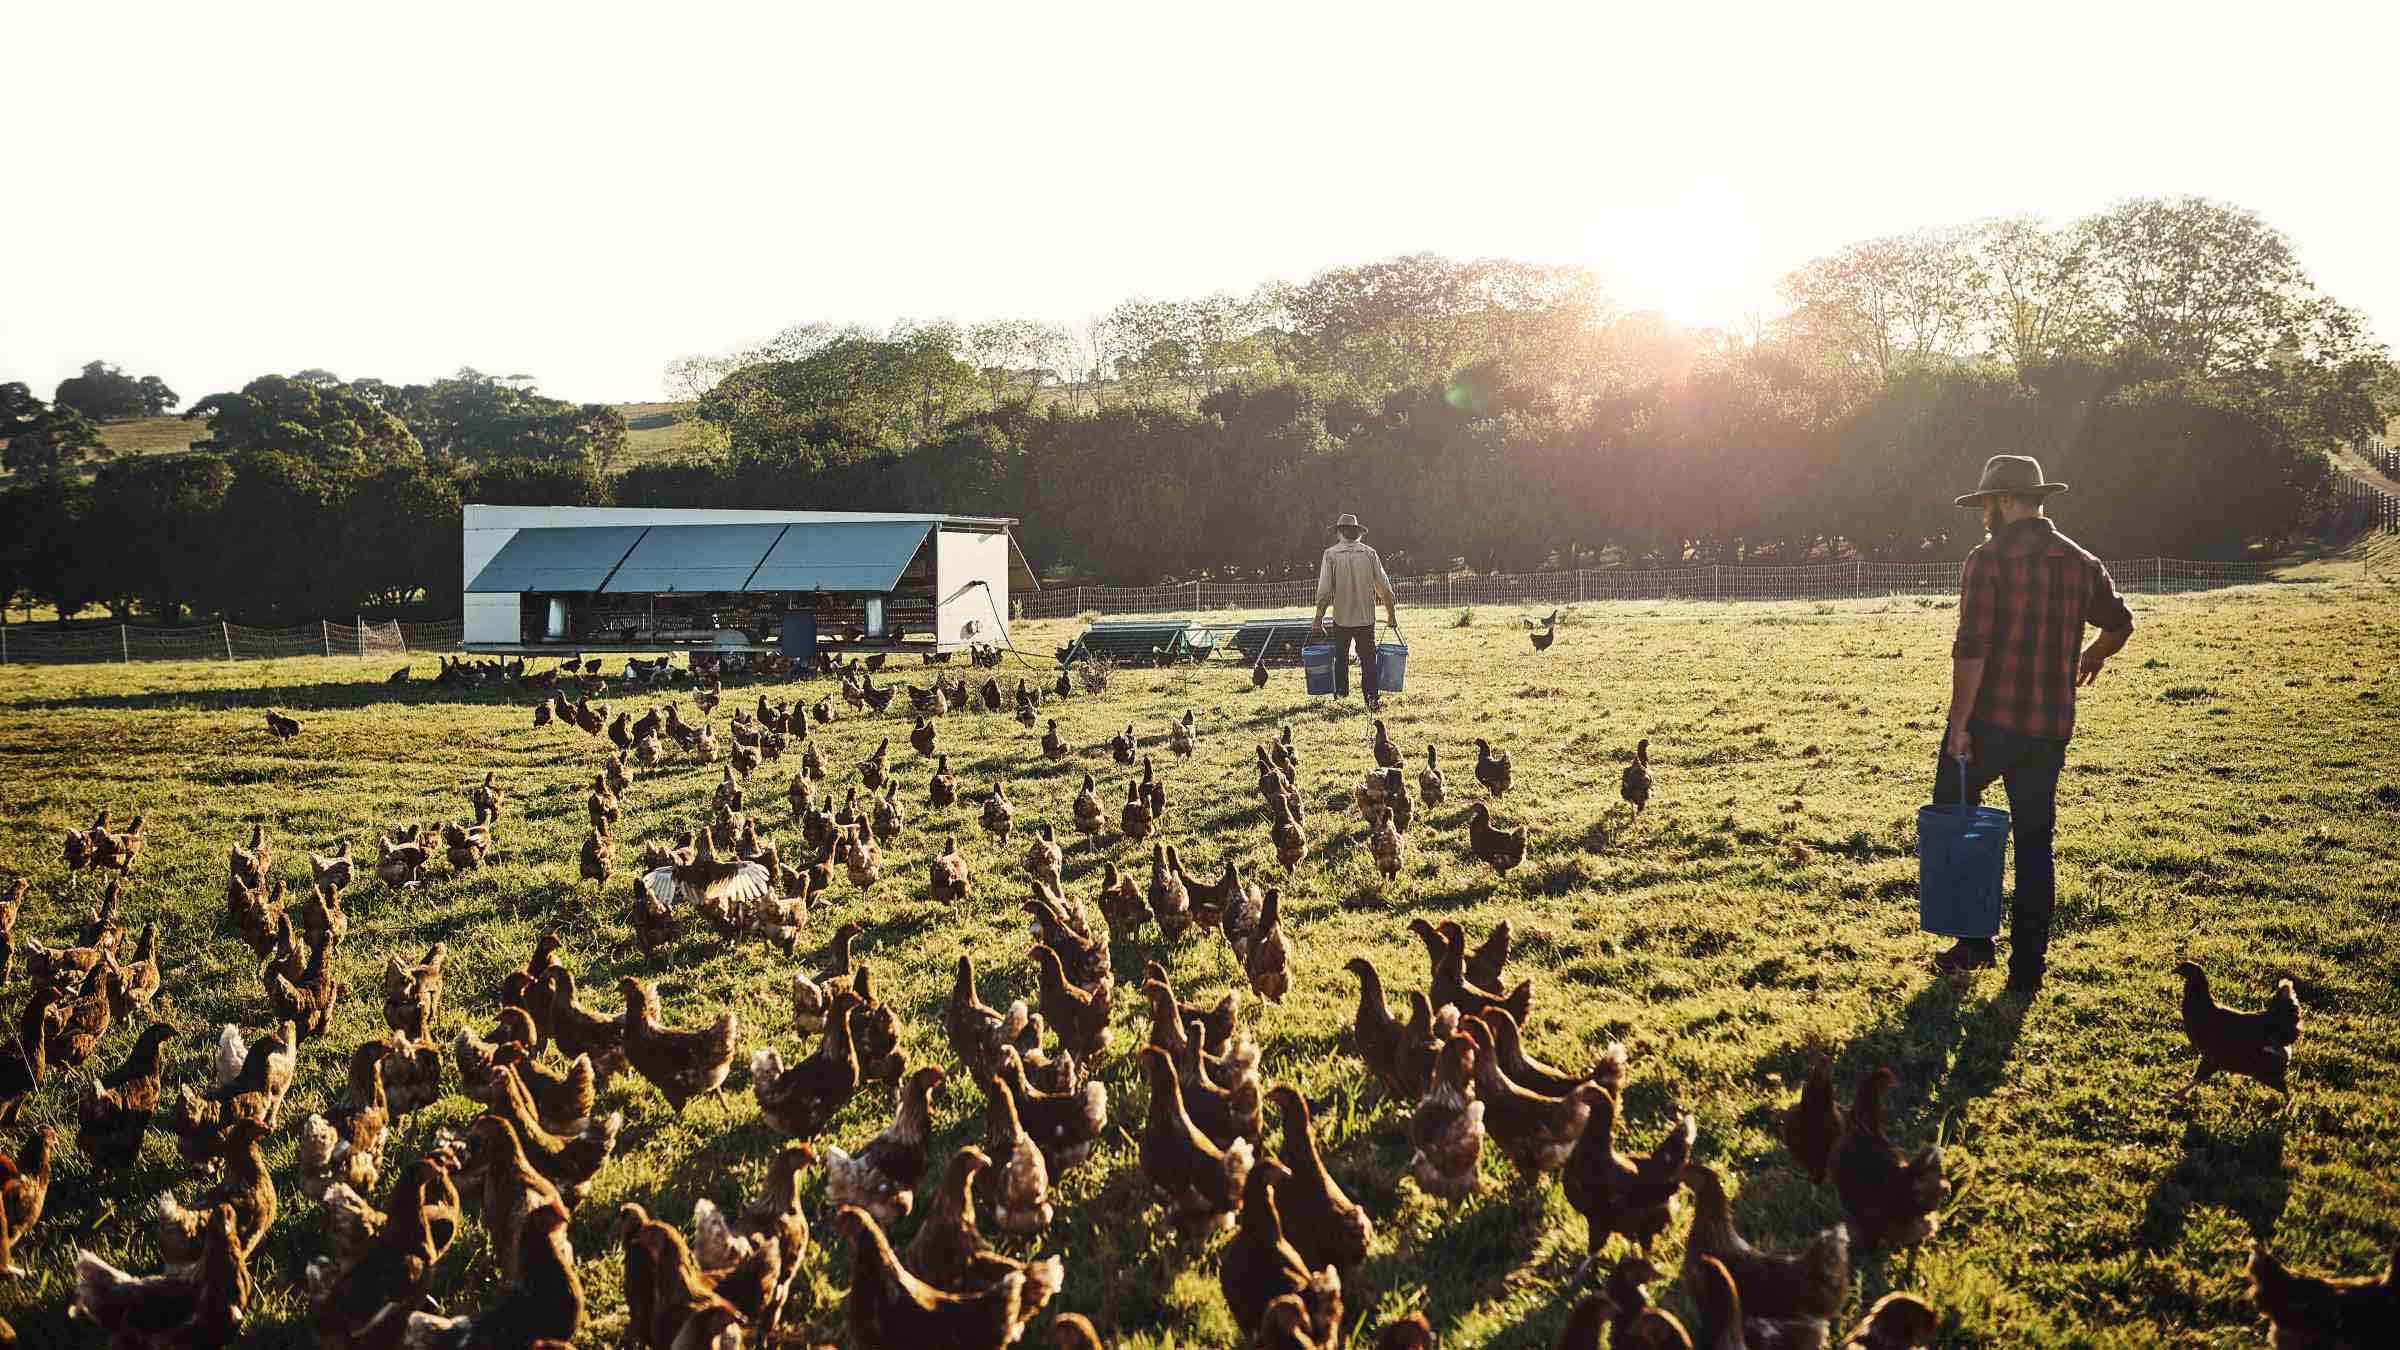 Workers at a chicken farm